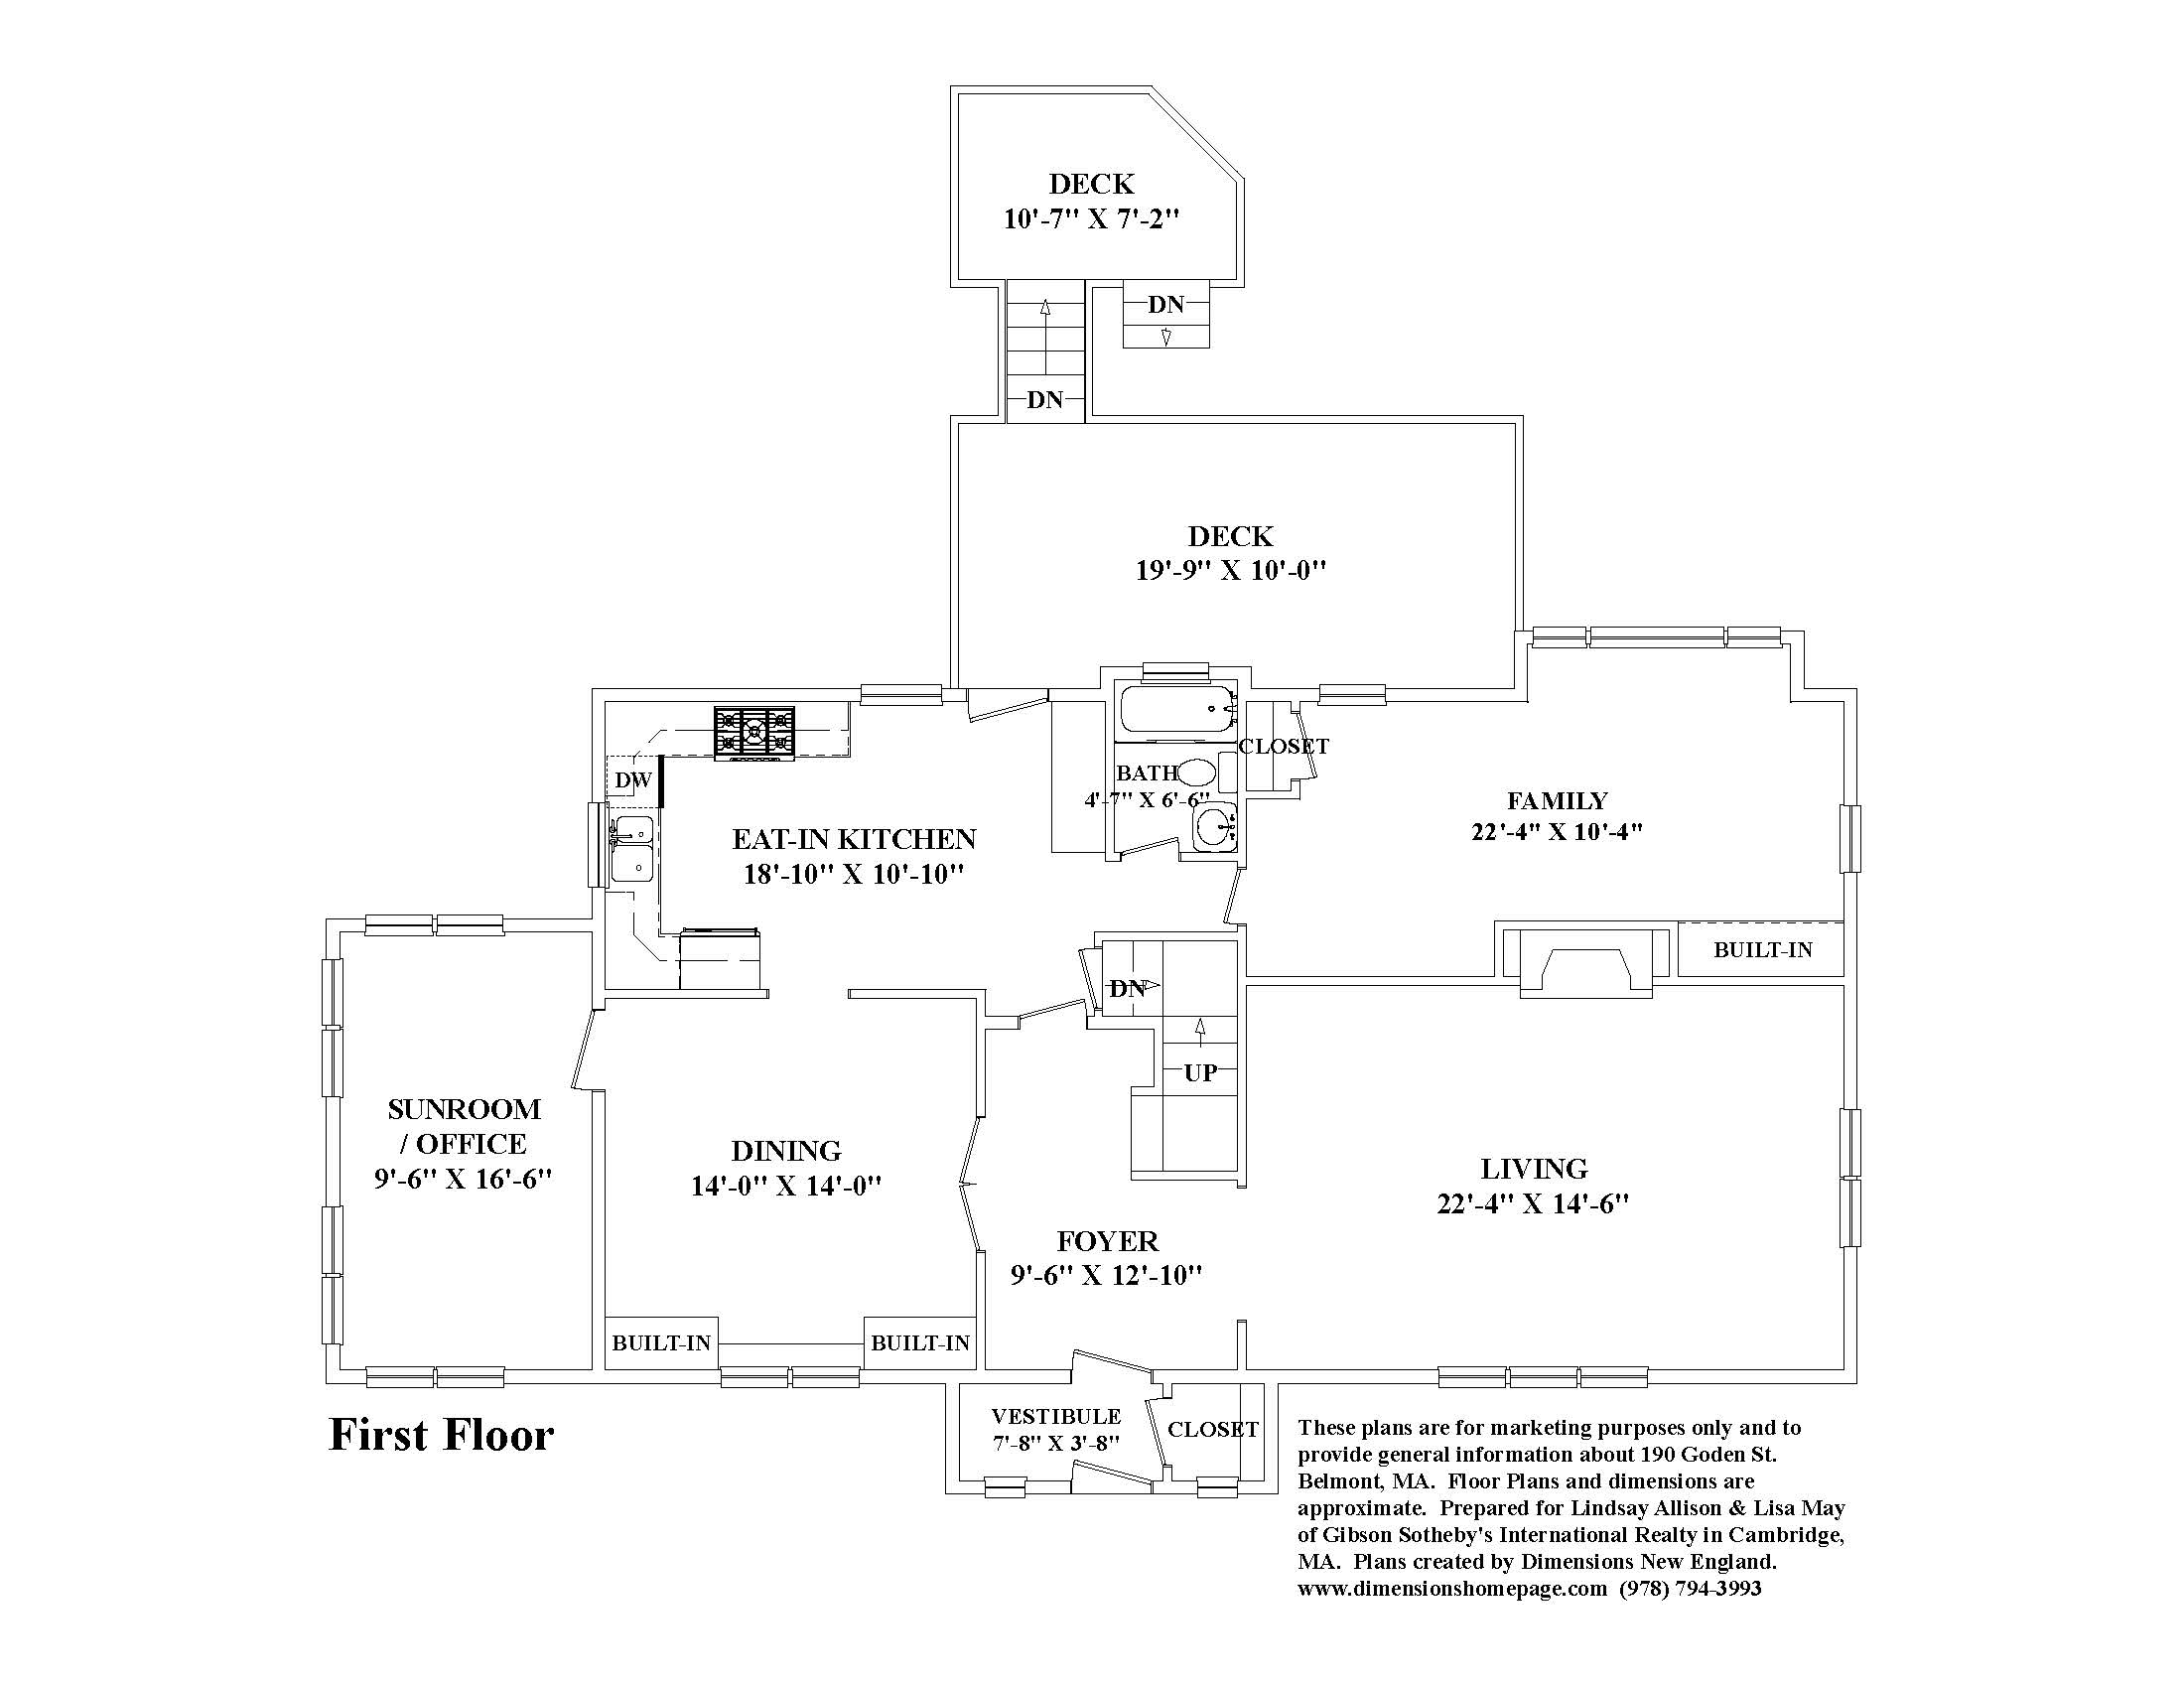 190 Goden combined floor plans unbranded_Page_1.jpg